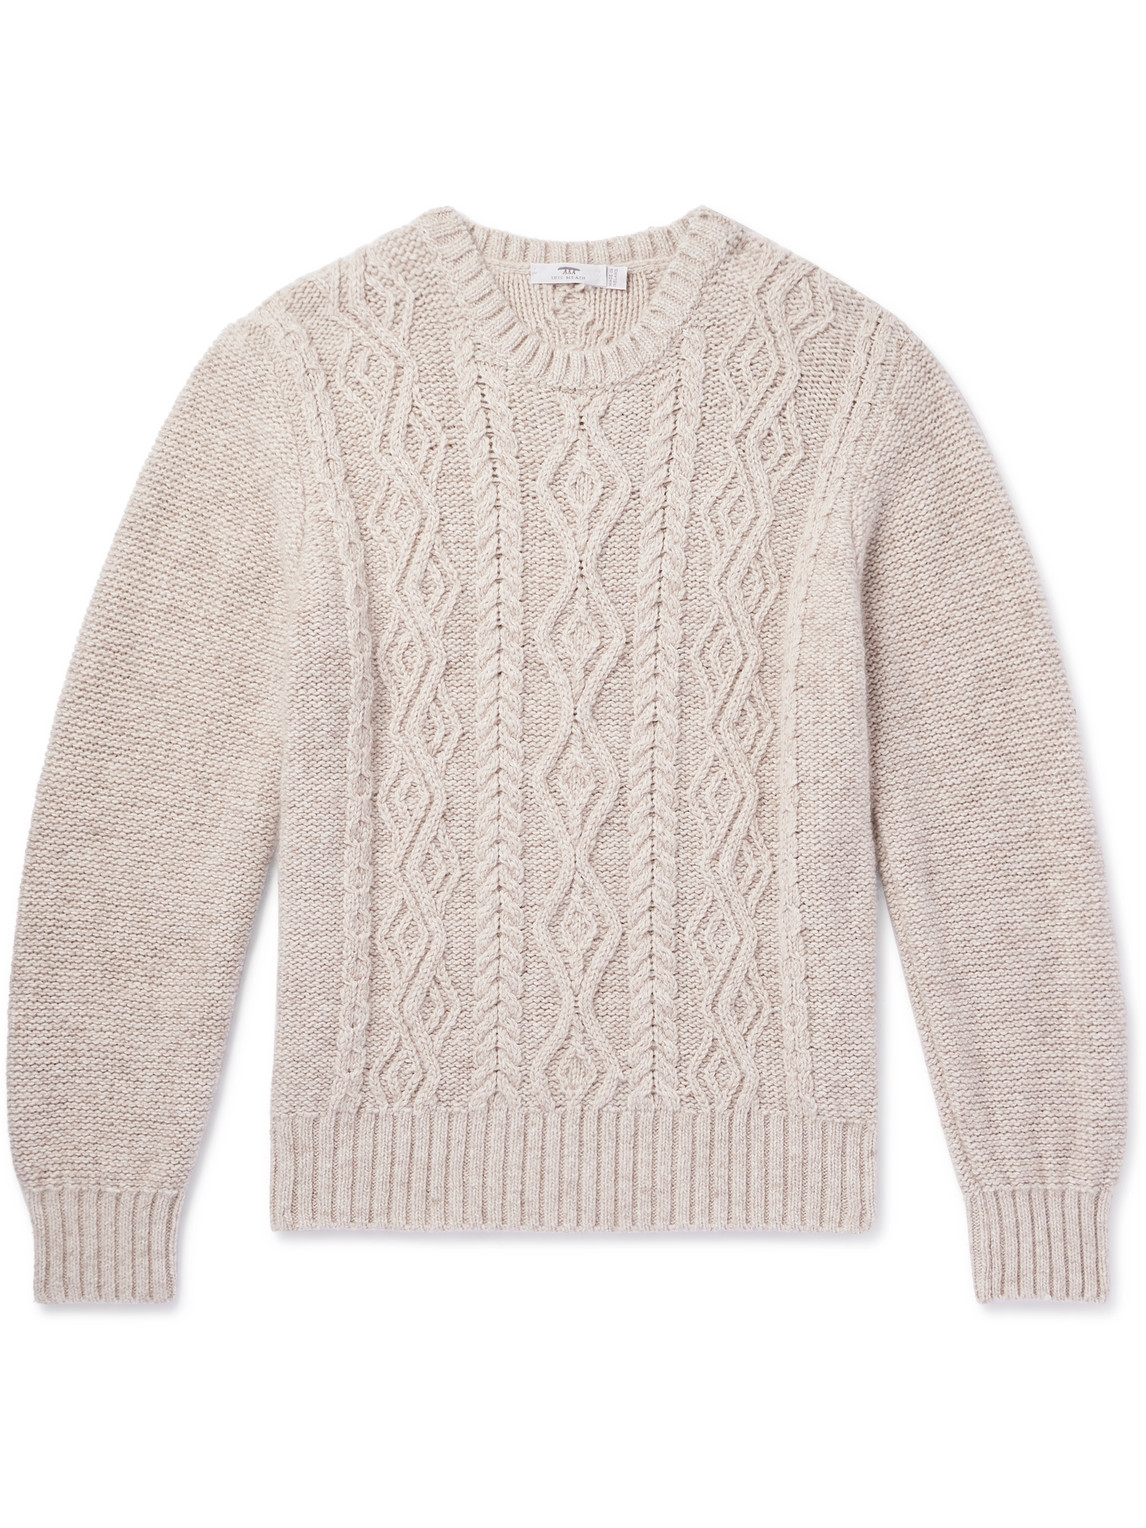 Inis Meain Aran Cable-knit Cashmere Jumper In White